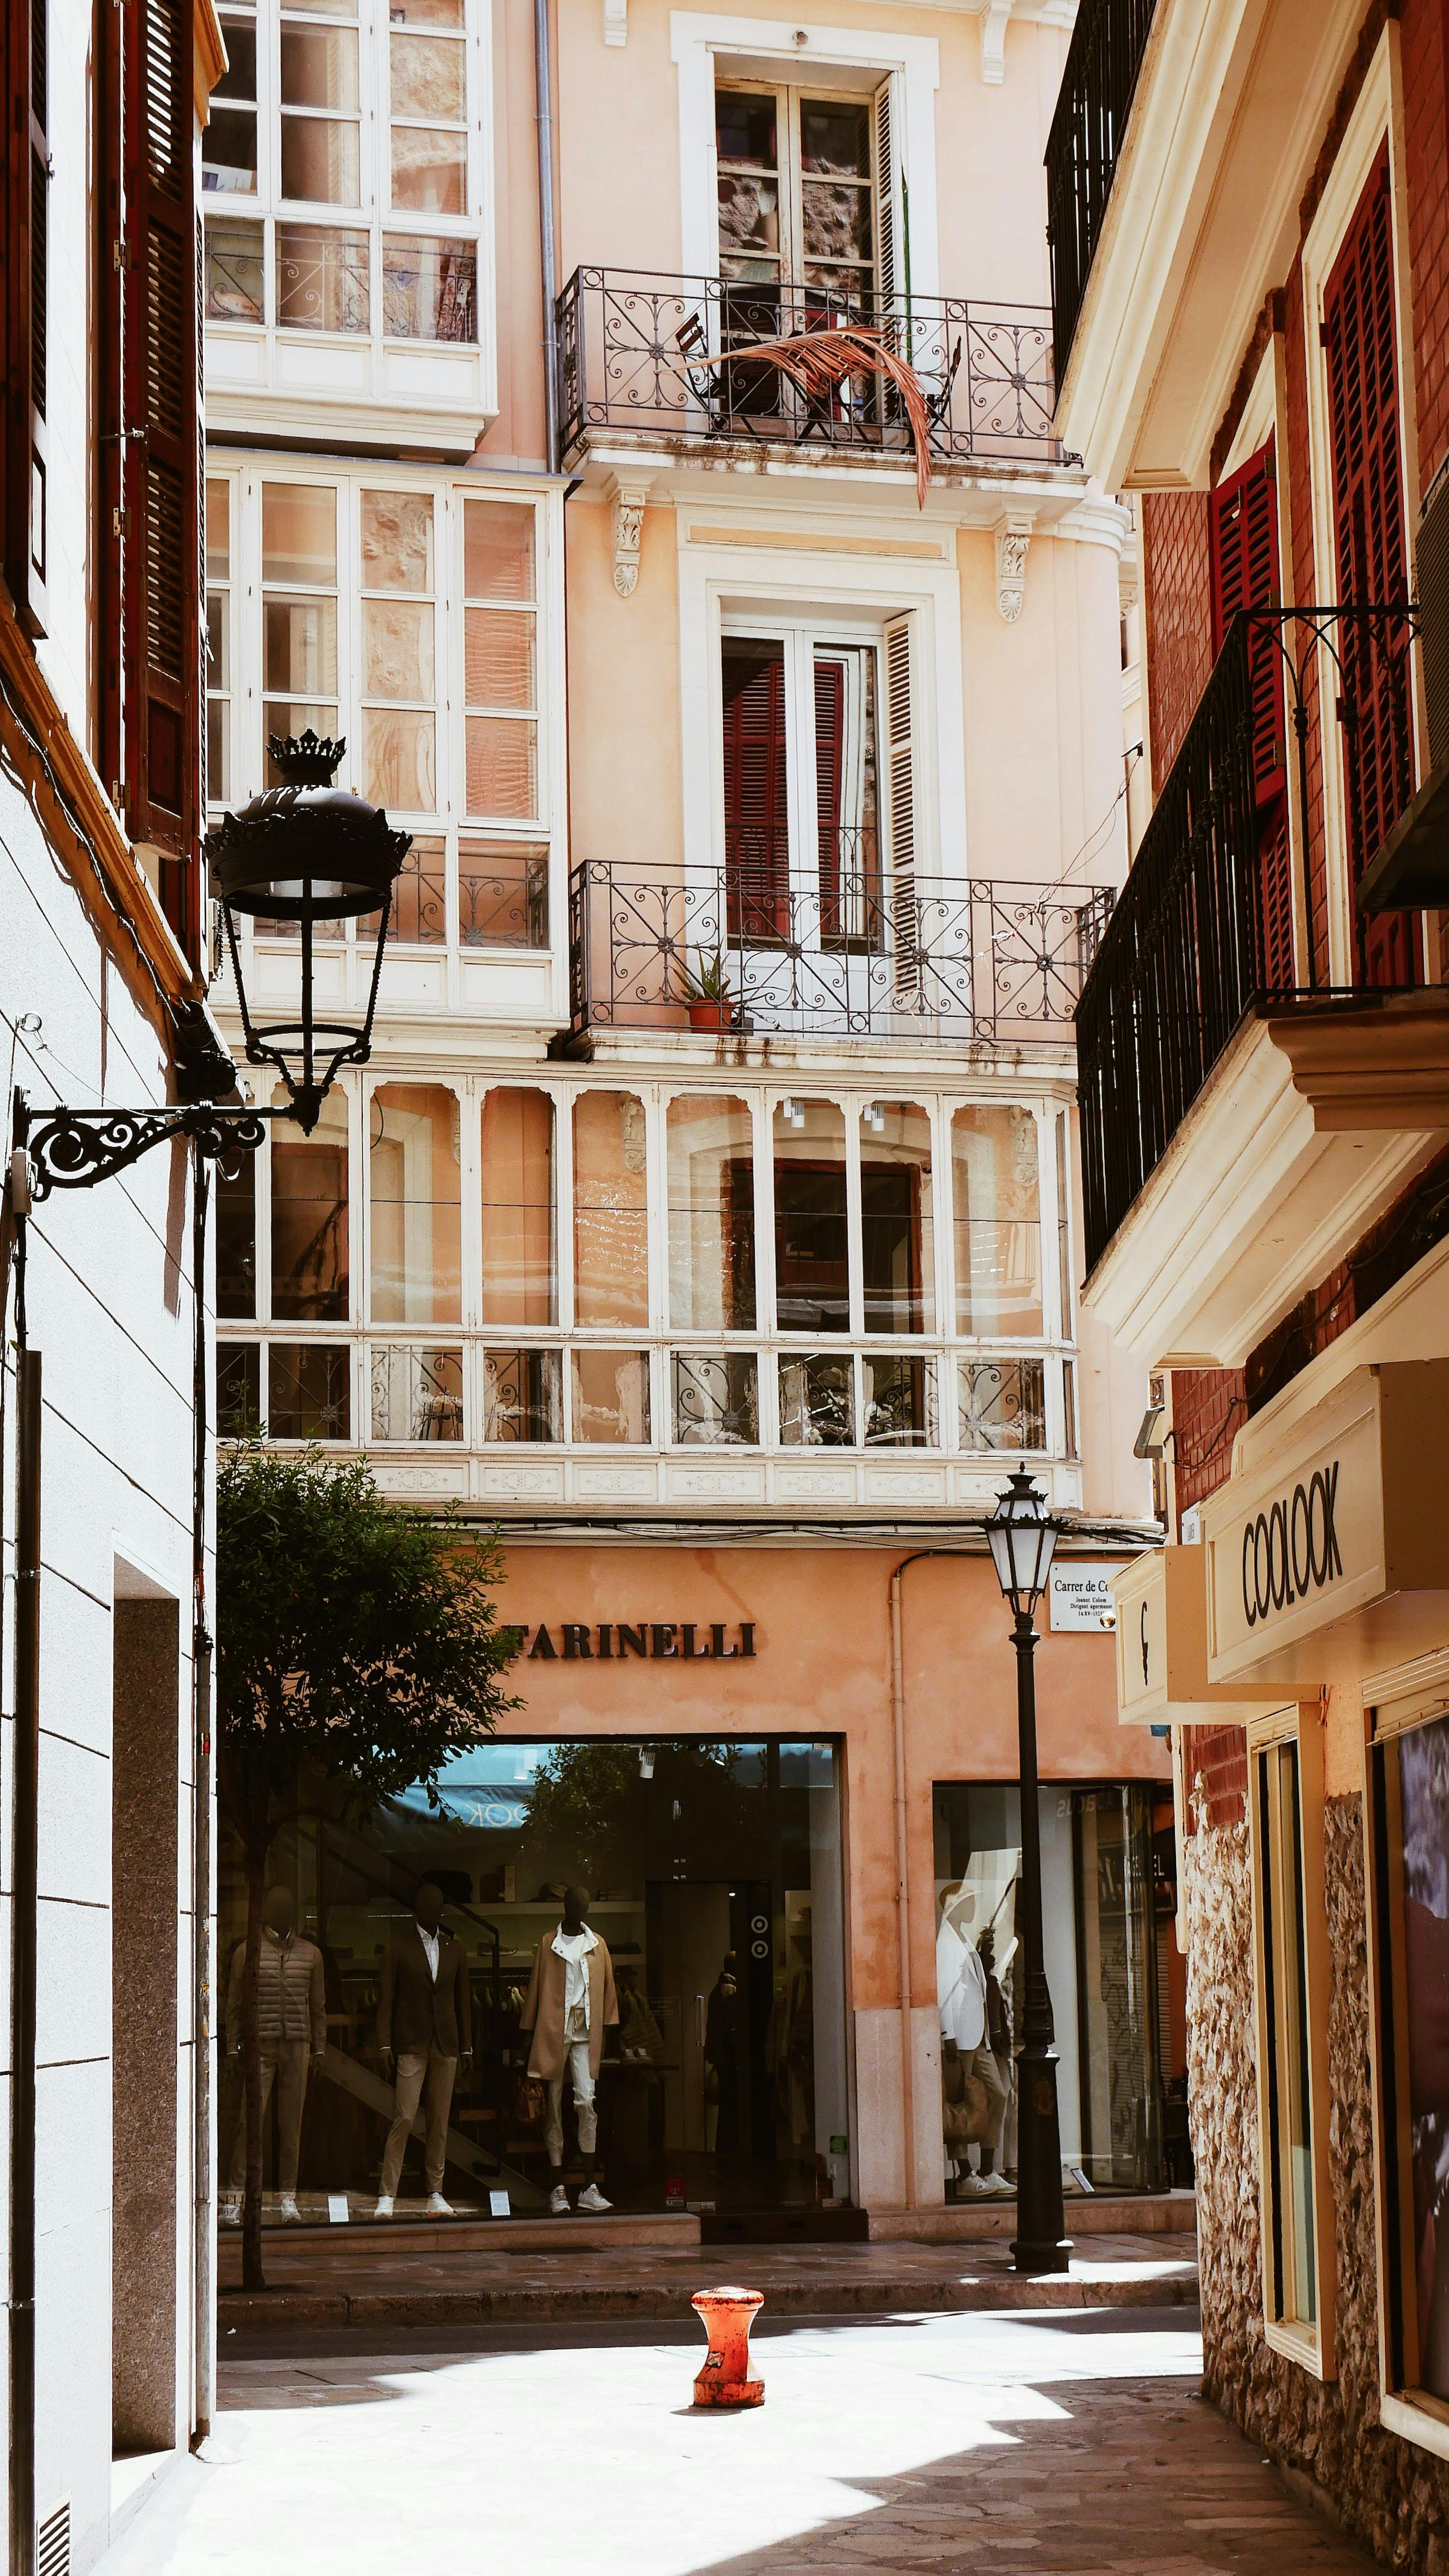 Everything You Need To About Shopping In Palma de Mallorca - Bounce